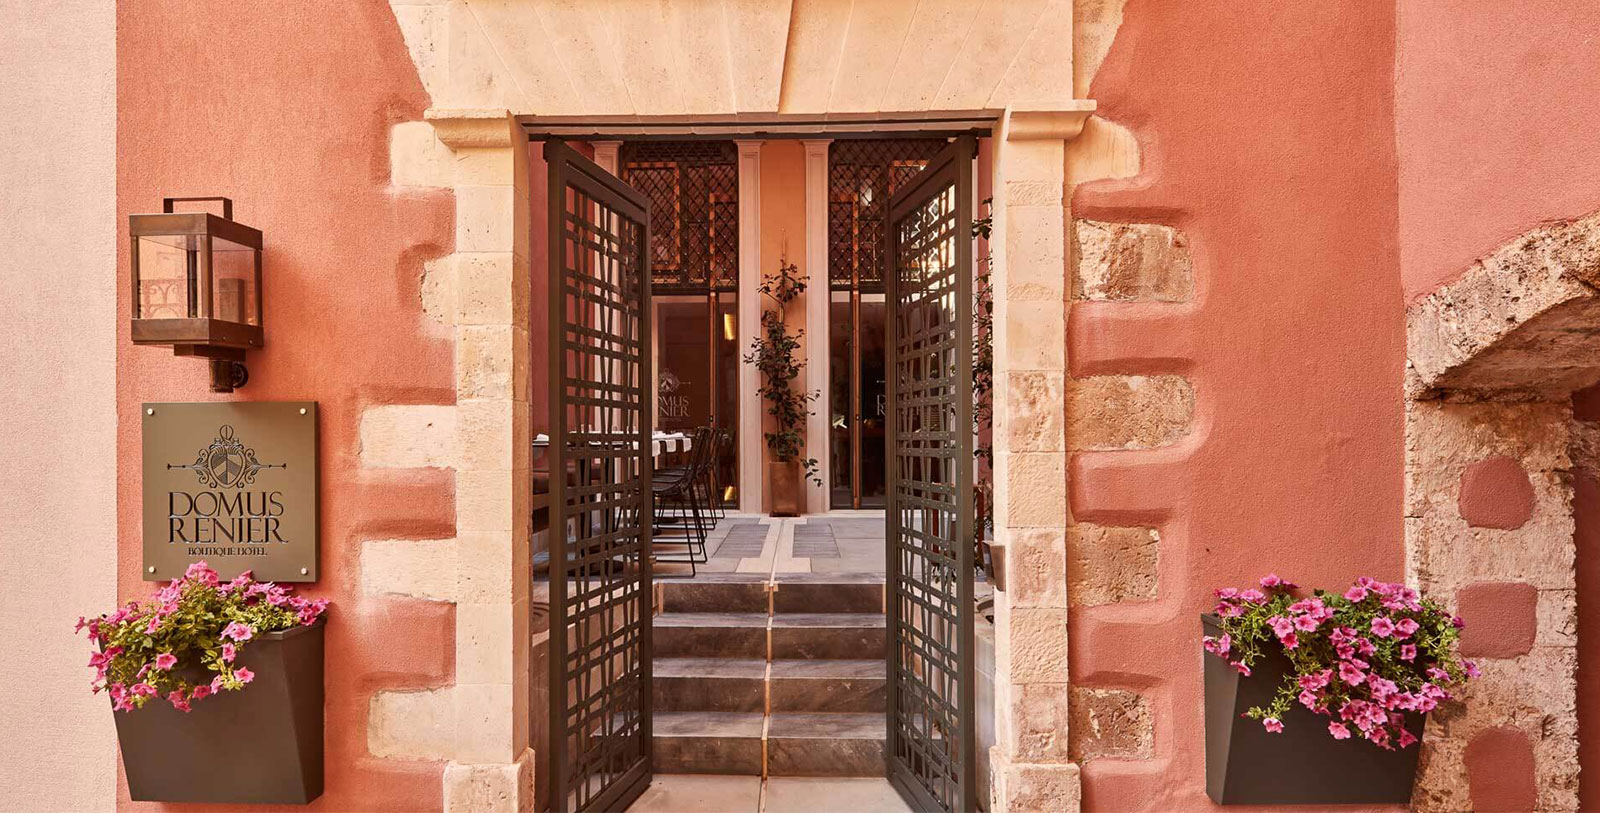 Image of hotel exterior Domus Renier Boutique Hotel, 1608, Member of Historic Hotels Worldwide, in Chania, Greece, Special Offers, Discounted Rates, Families, Romantic Escape, Honeymoons, Anniversaries, Reunions